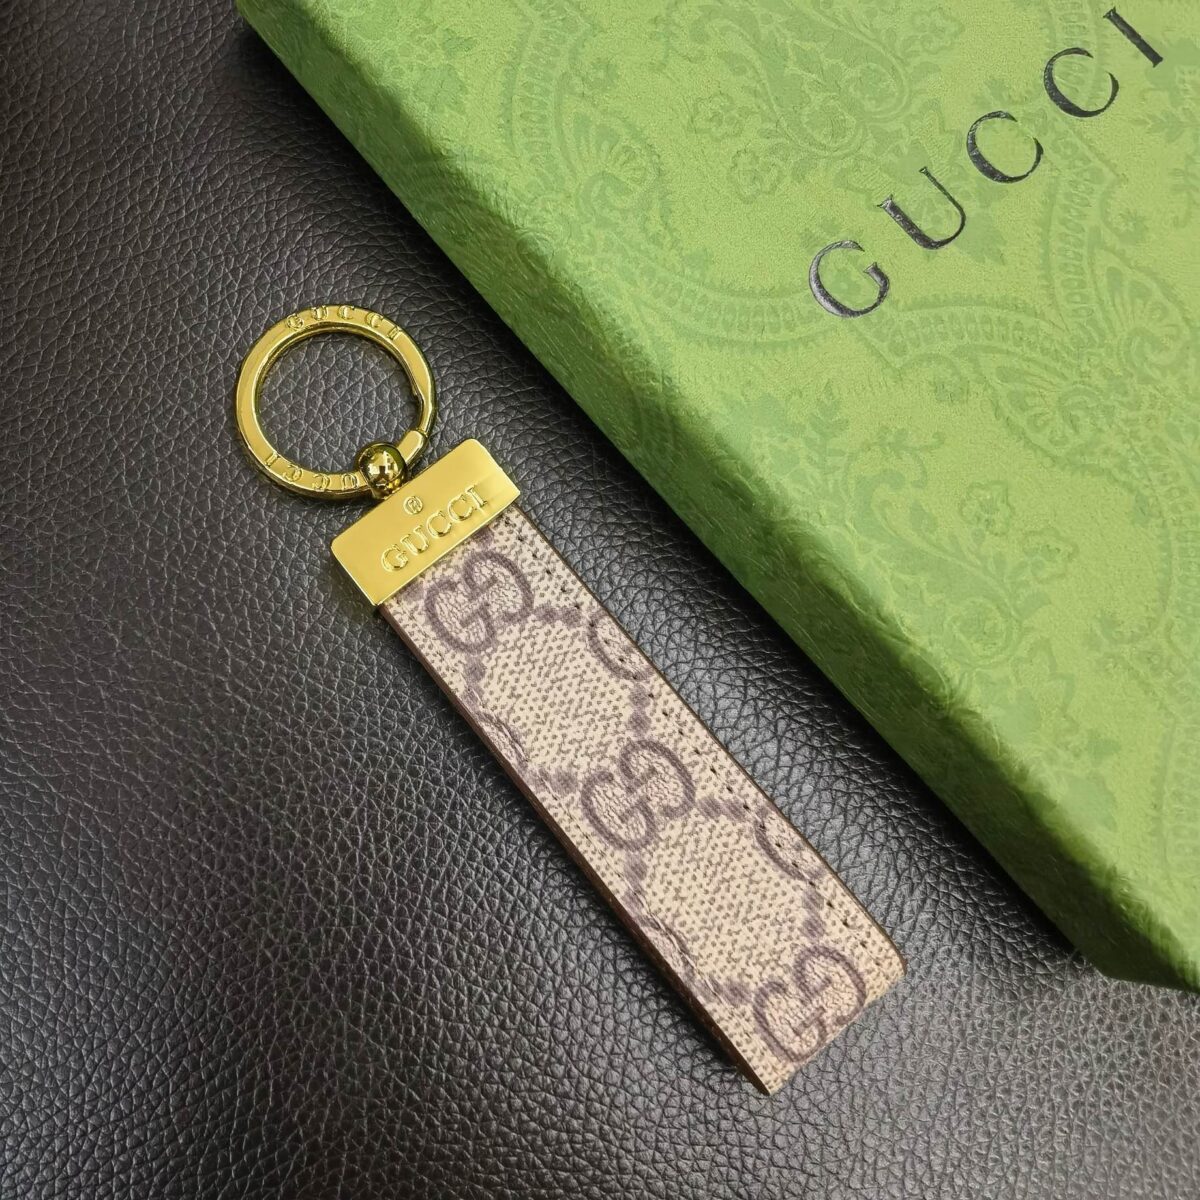 Elegant Gucci key chains with intricate designs, showcasing opulence and sophistication